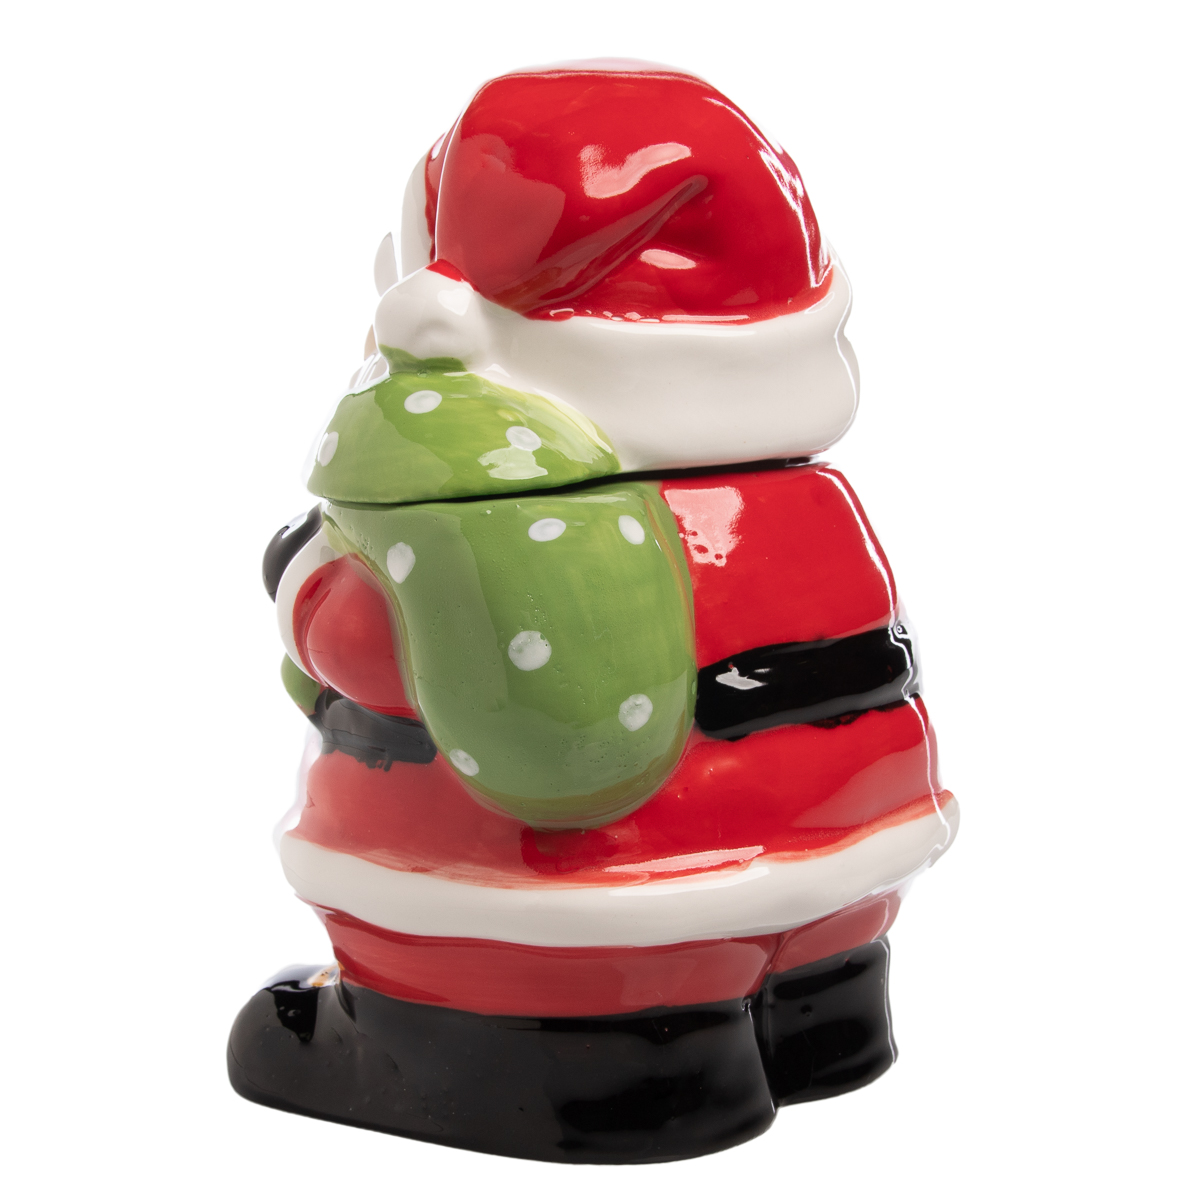 Gibson Home Santa Claus 7.5" Ceramic Holiday Season Treat Jar with Lid Bag Silicone - image 3 of 7